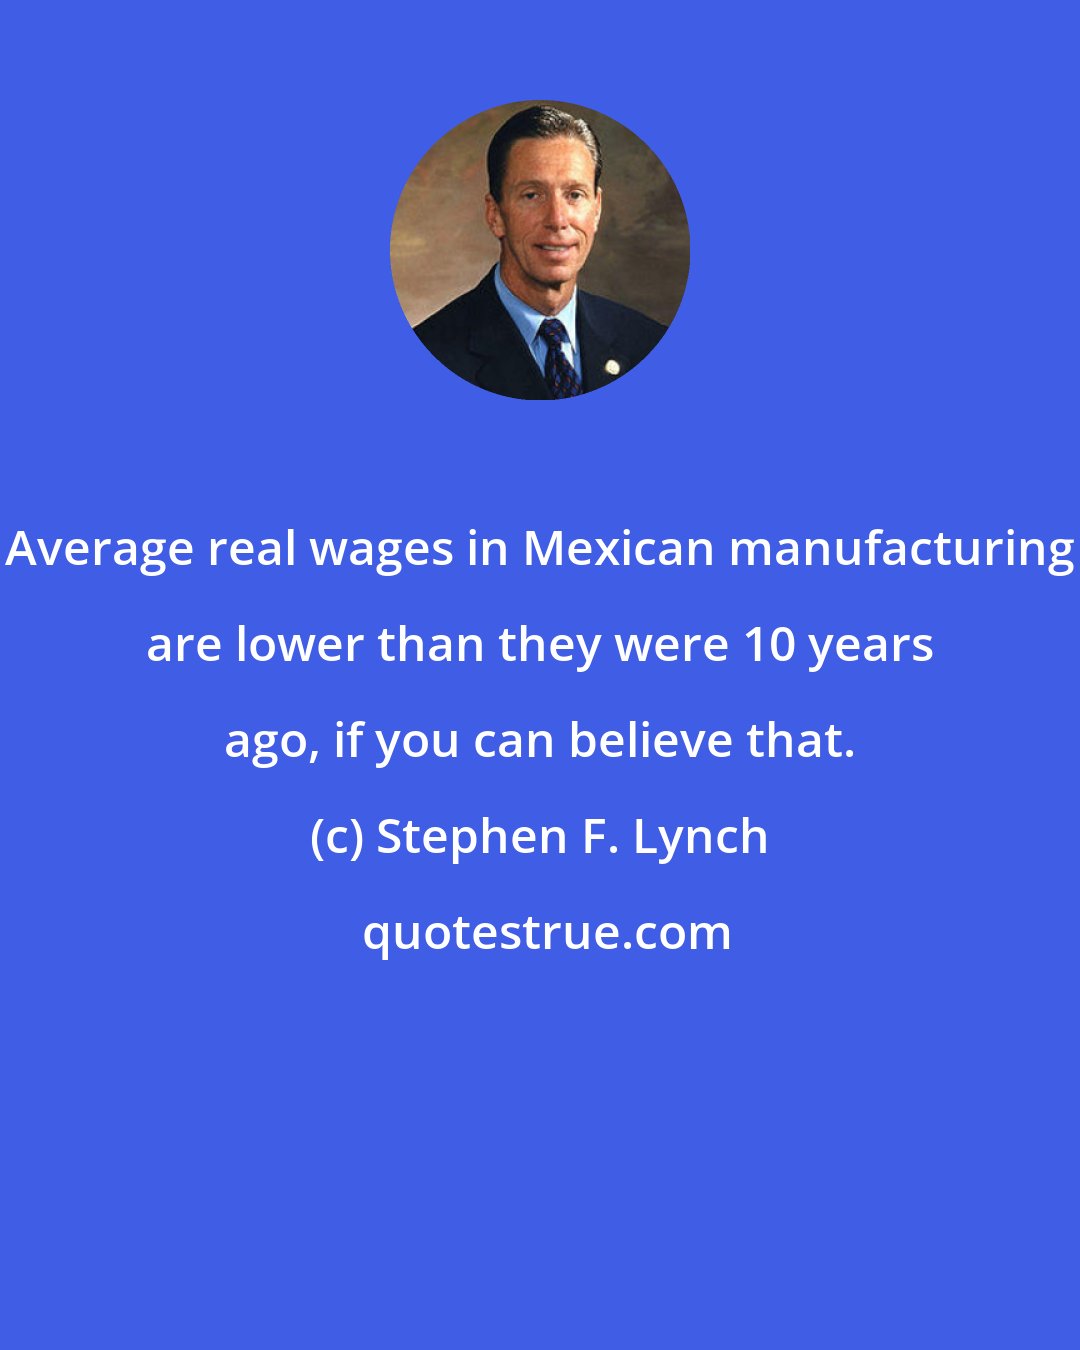 Stephen F. Lynch: Average real wages in Mexican manufacturing are lower than they were 10 years ago, if you can believe that.